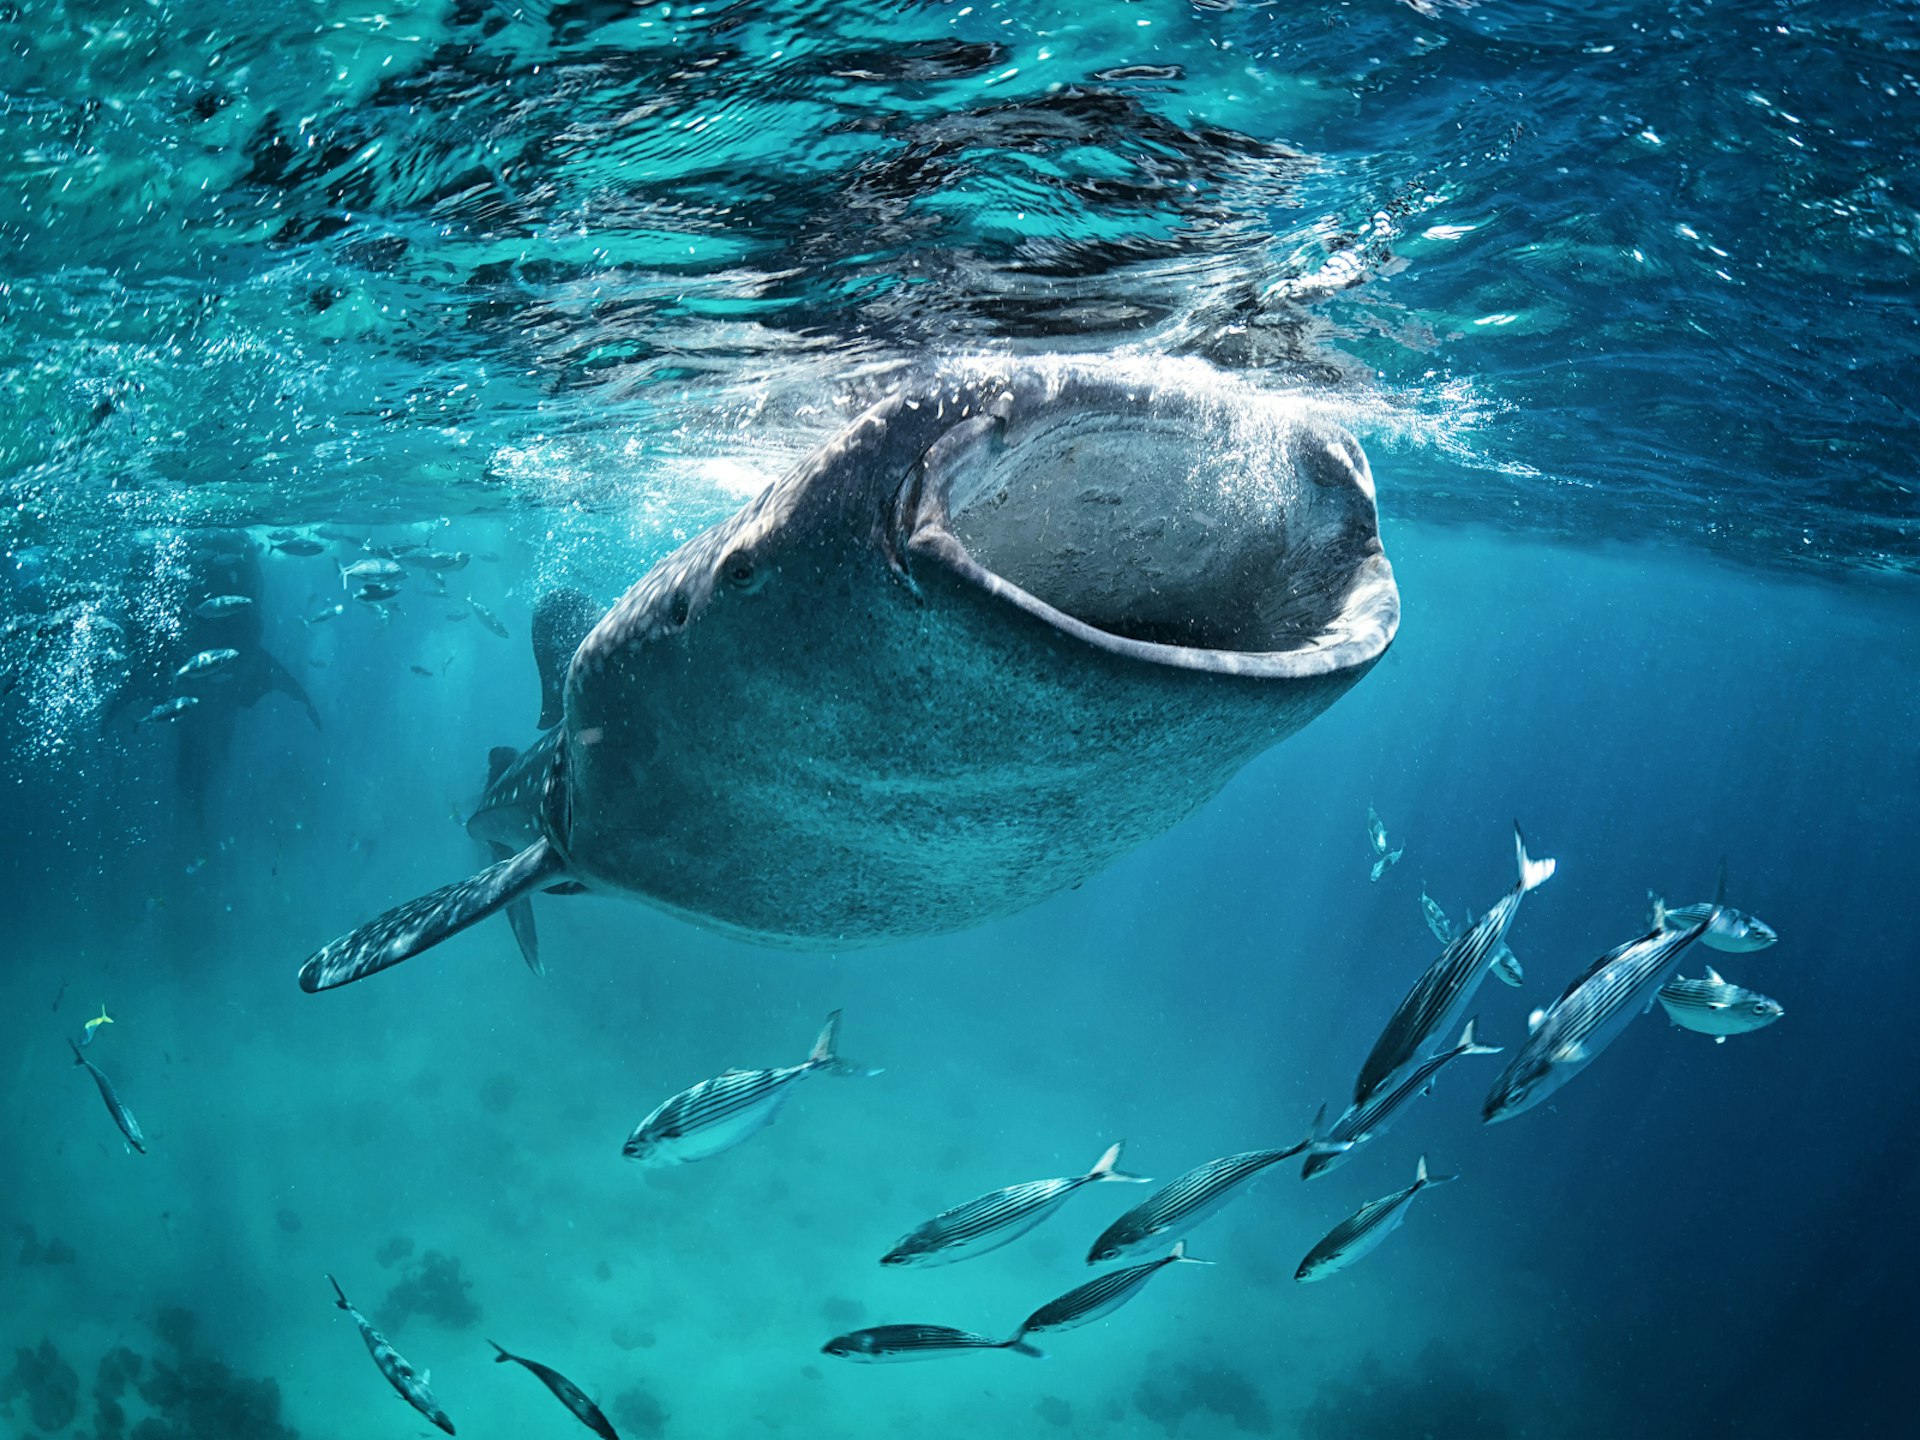 Underwater shot of a whale shark feeding near the surface of the water with its huge mouth wide open; a shoal of fish surrounds it. 